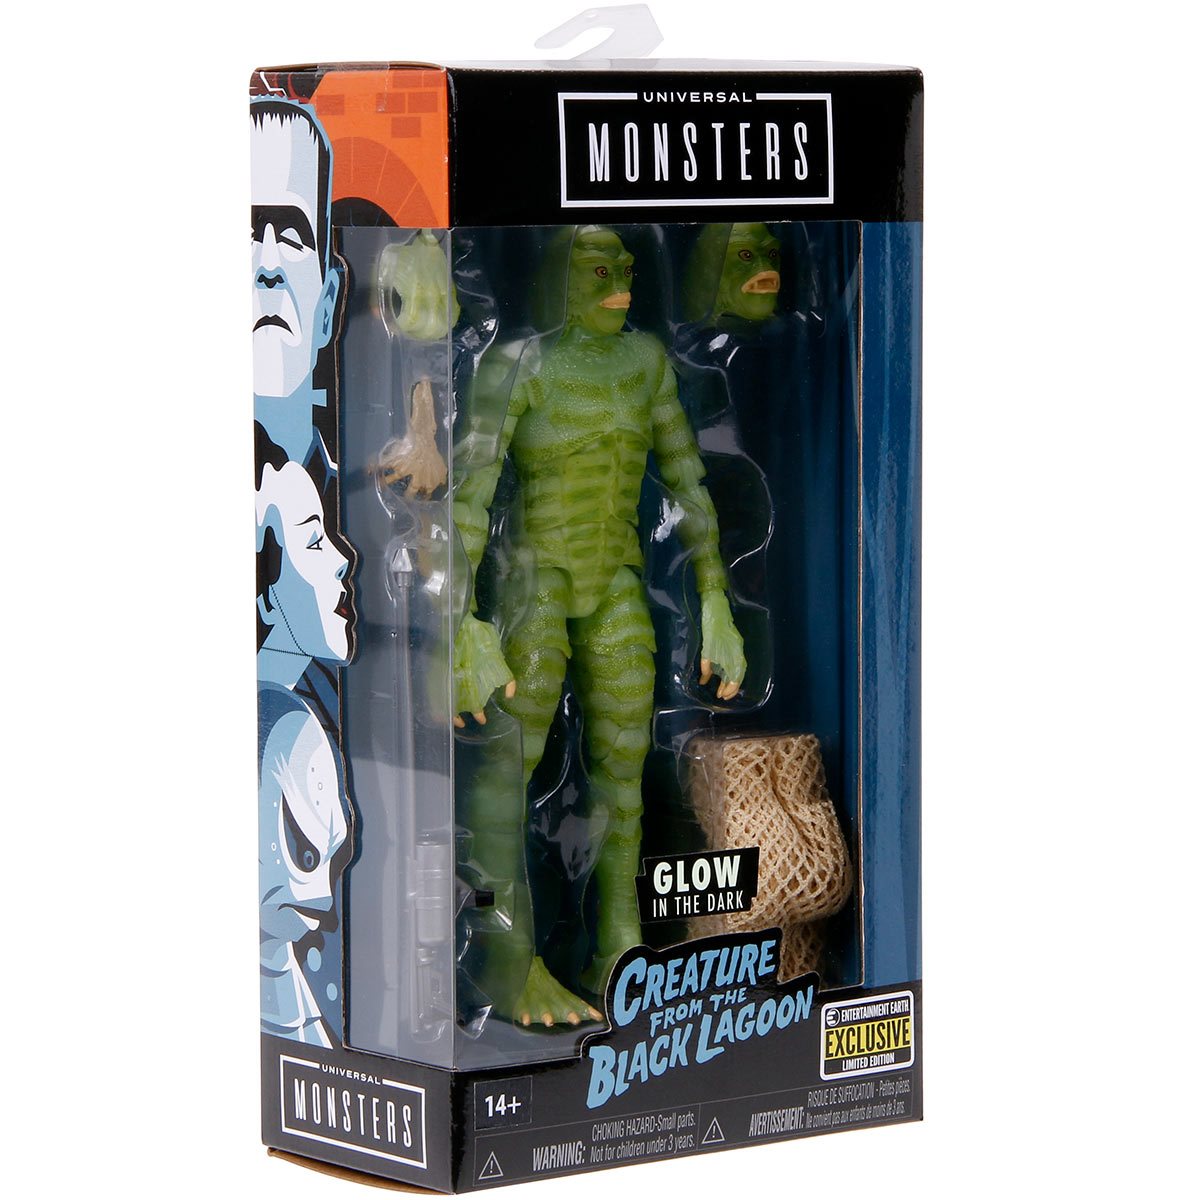 Universal Monsters Creature from the Black Lagoon Glow-in-the-Dark 6-Inch Action Figure (EE Exclusive)